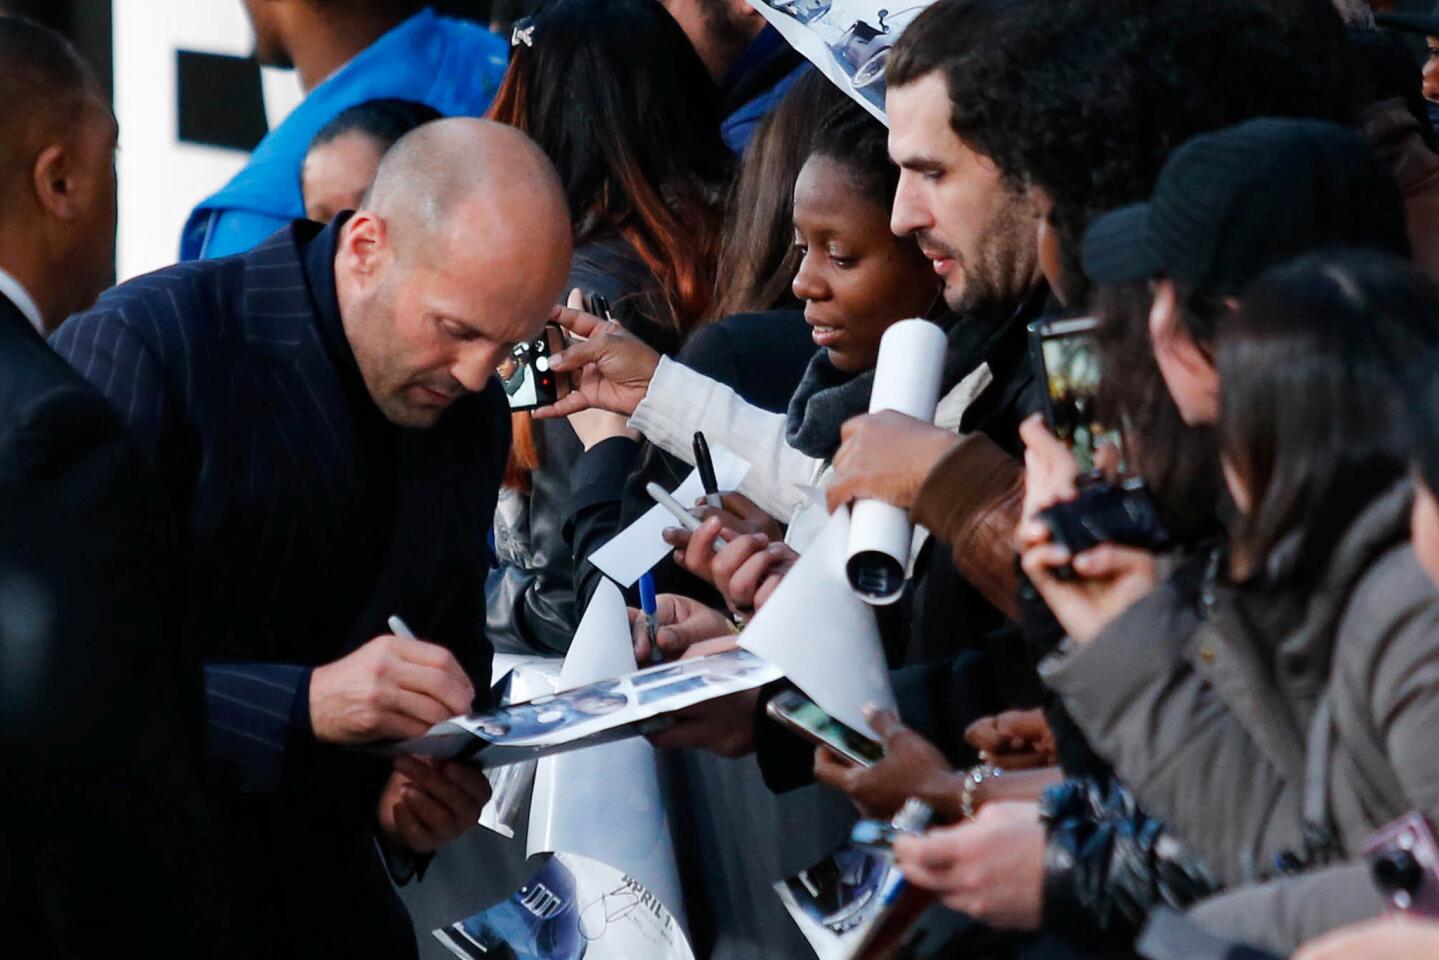 Actor Jason Statham attends 'The Fate Of The Furious' New York premiere at Radio City Music Hall in New York